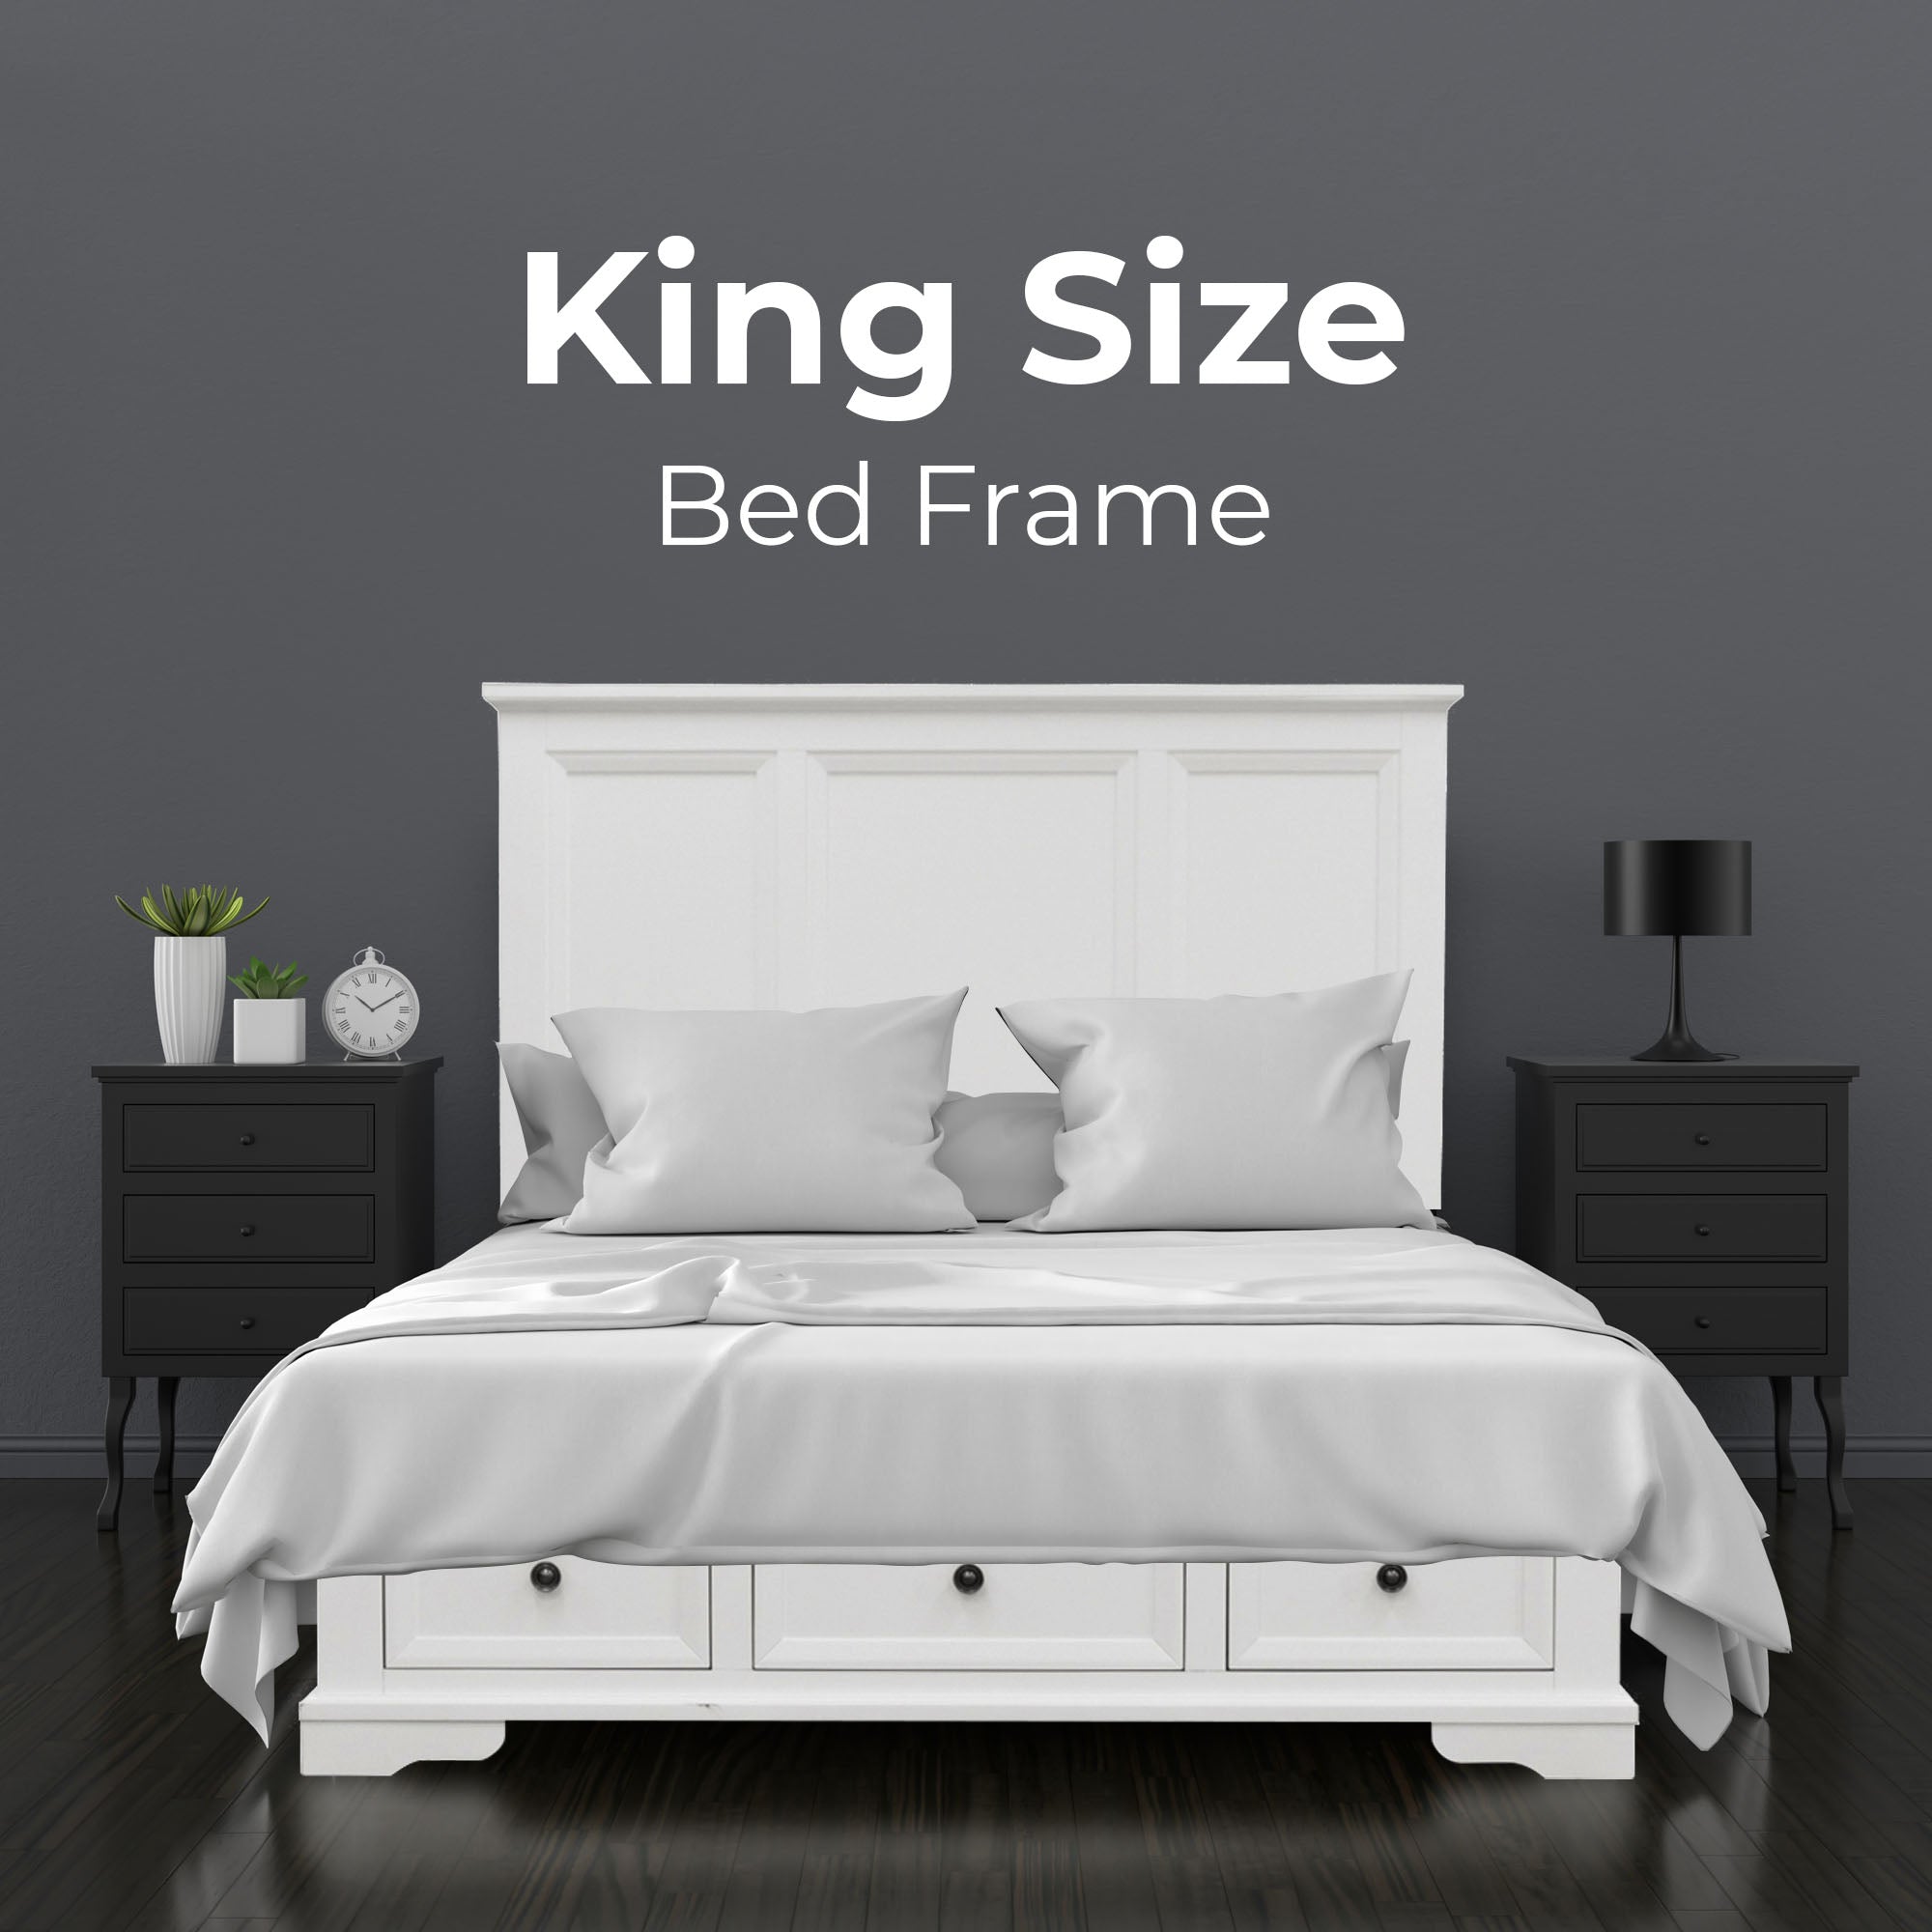 Celosia King Size Bed Frame Timber Mattress Base With Storage Drawers - White - SILBERSHELL